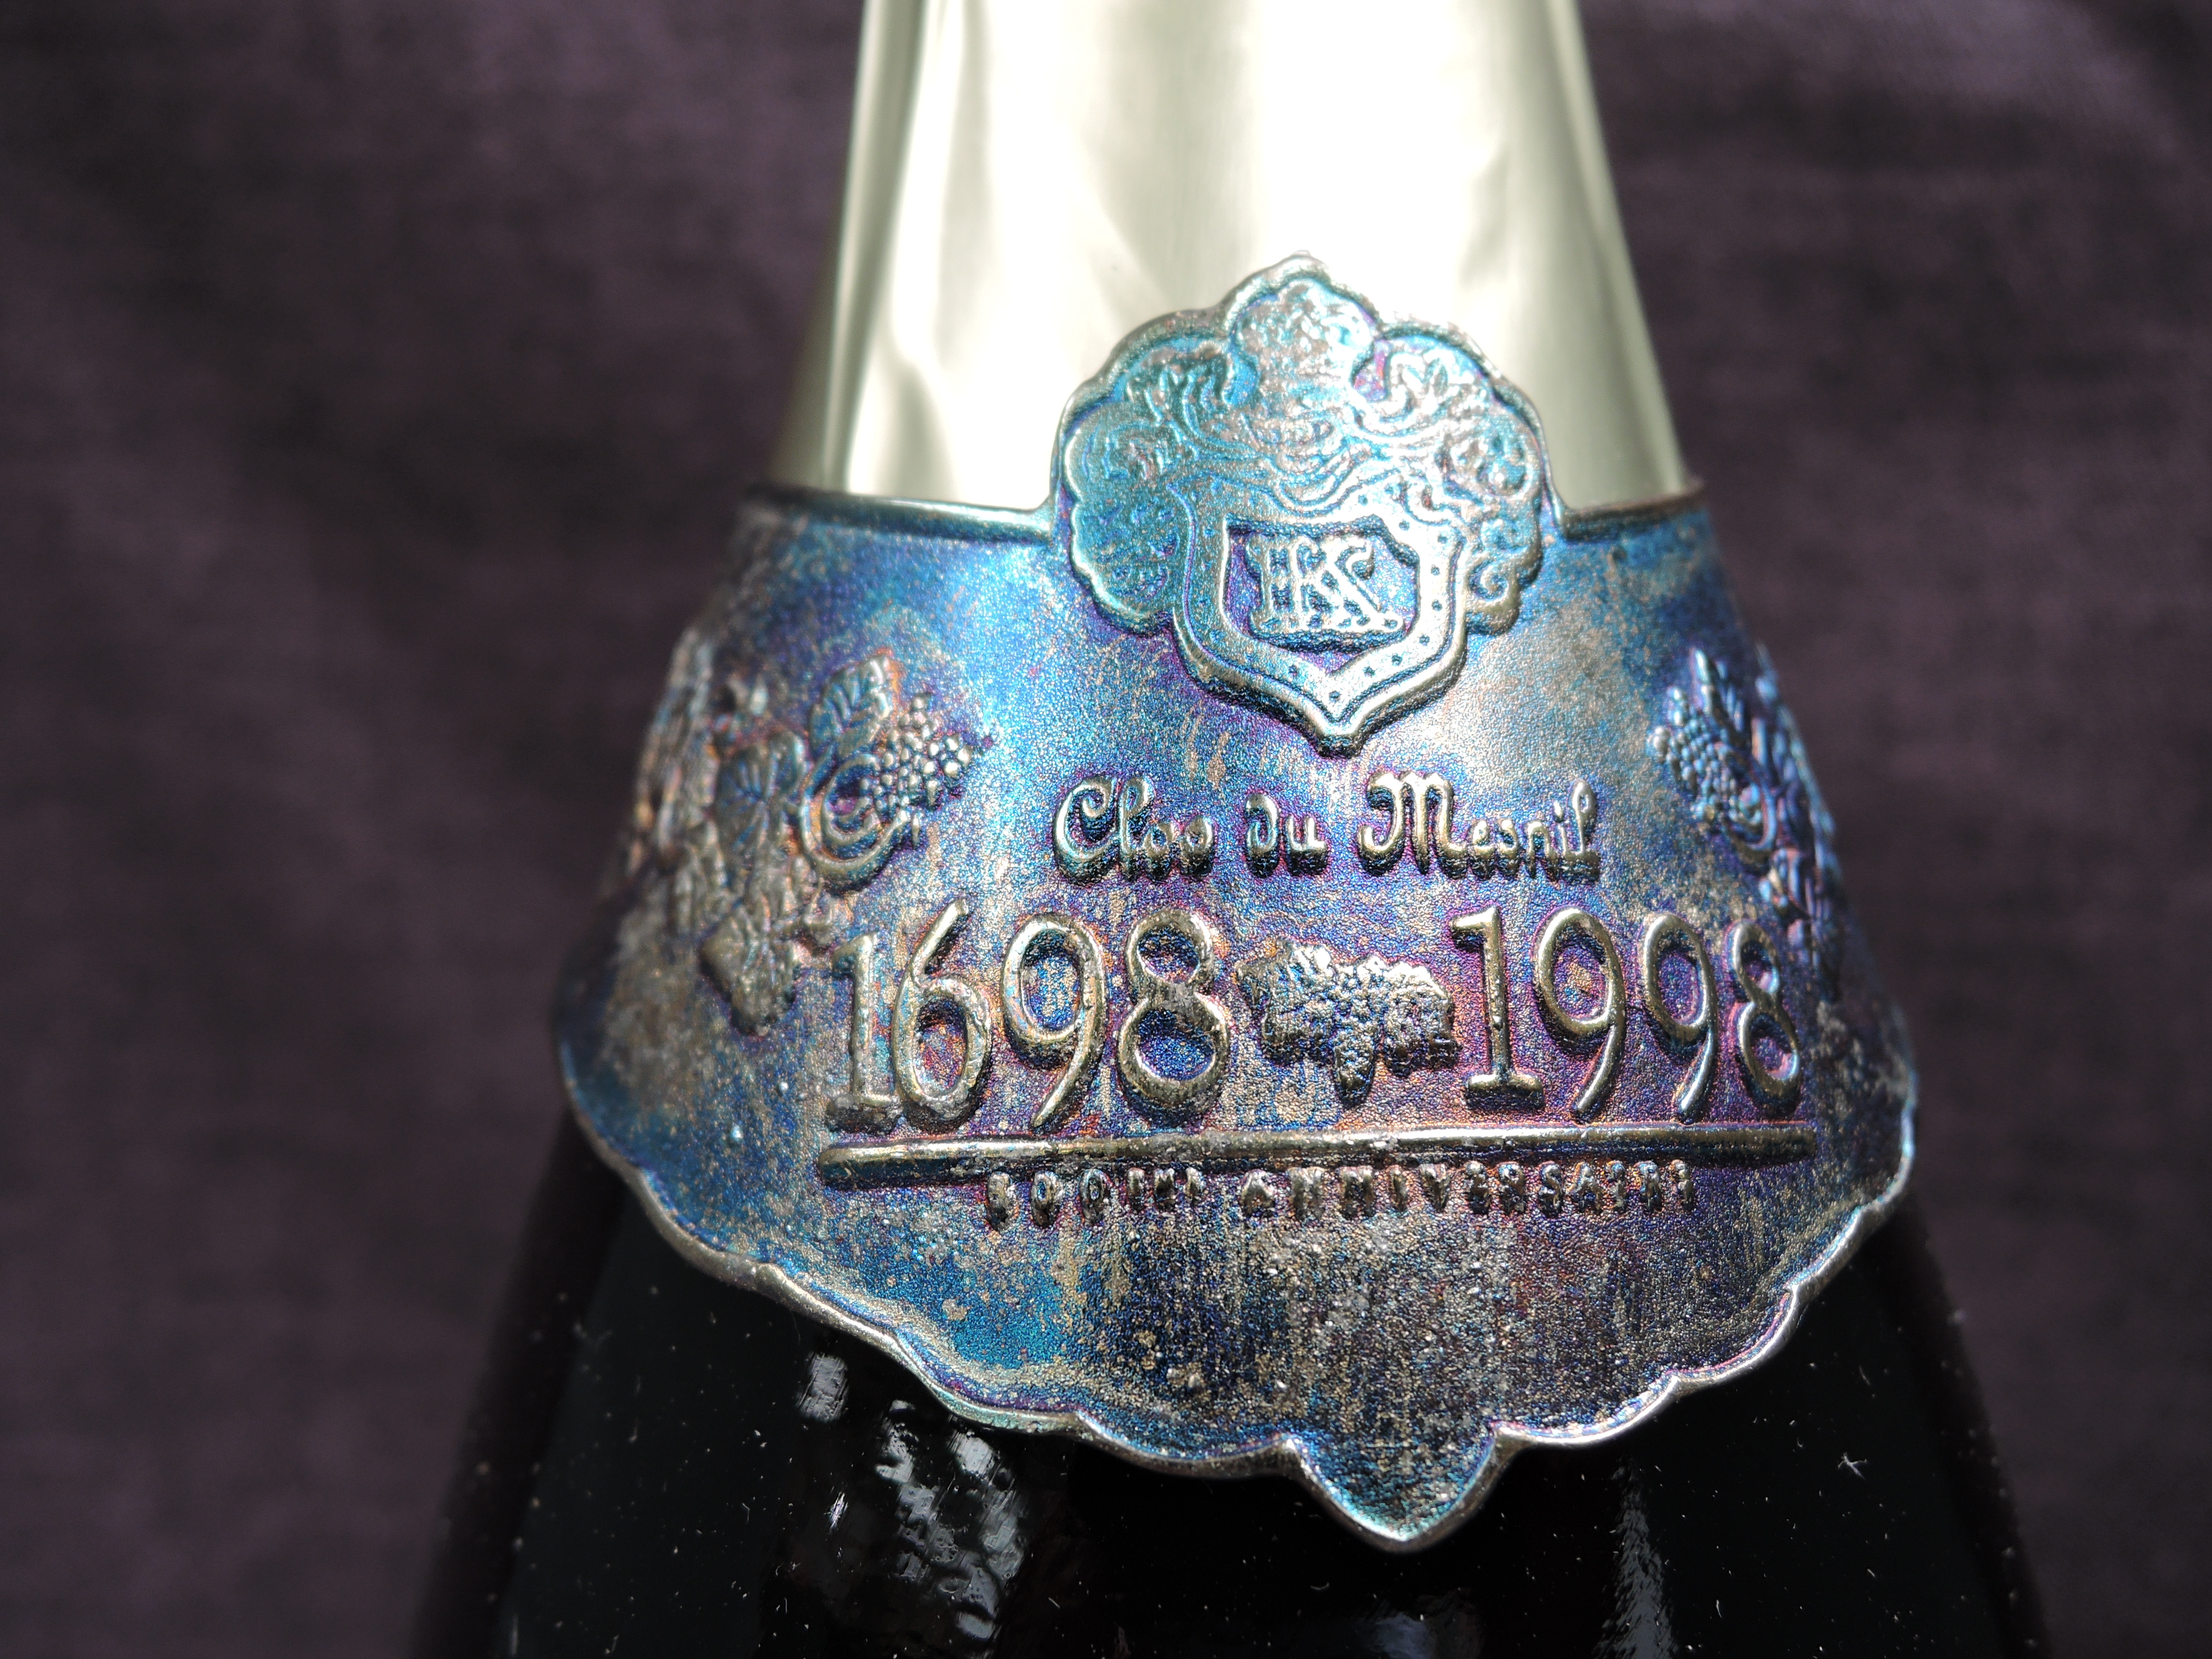 A bottle of Krug Clos Du Mesnil 1989 Champagne, 1698-1998 300 year anniversary, bottle no 07078, 12% - Image 4 of 8